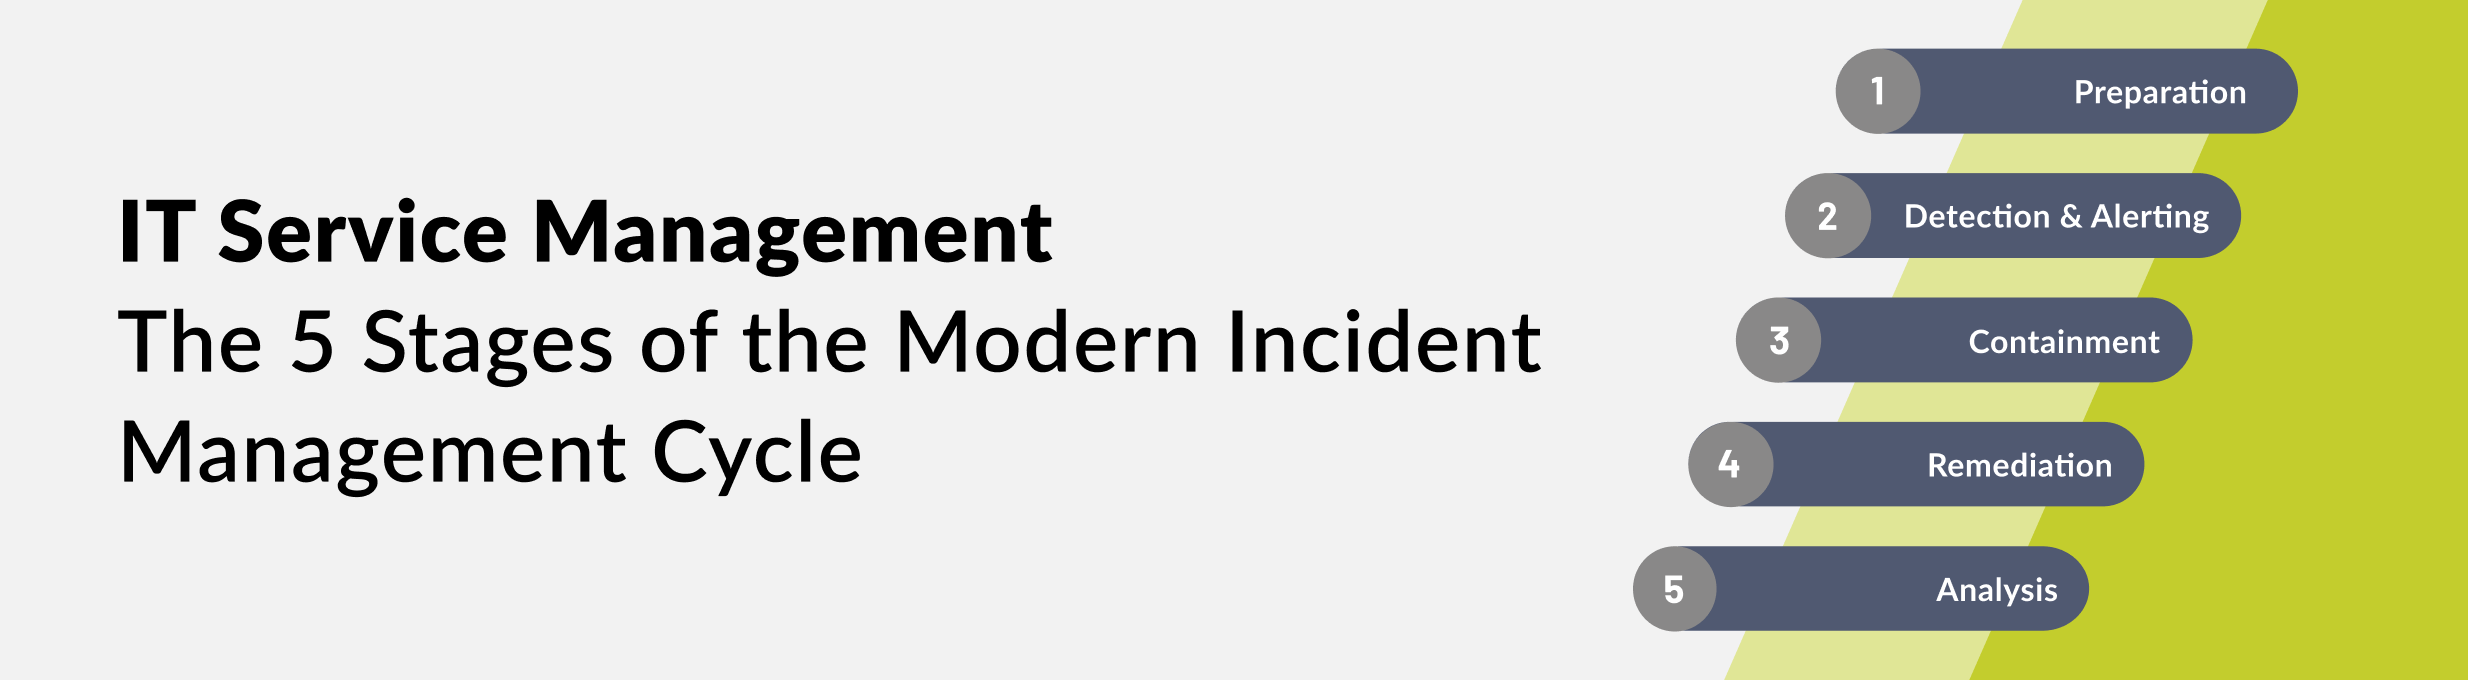 IT Service Management The 5 Stages of the Modern Incident Management Cycle - banner